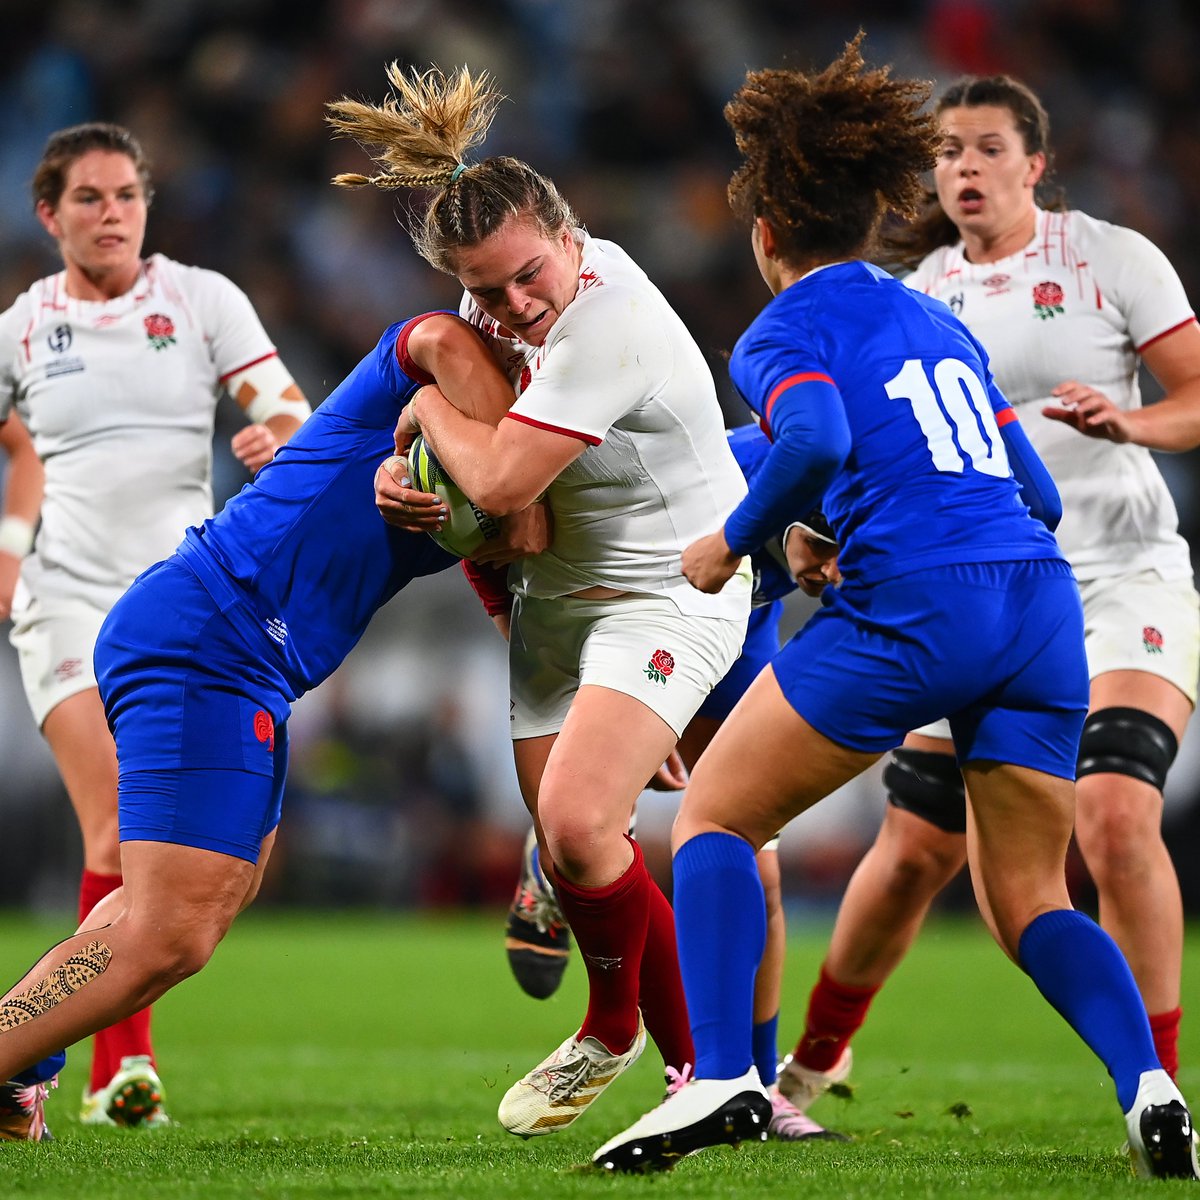 What did you make of that first half?

#FRAvENG | #RedRoses